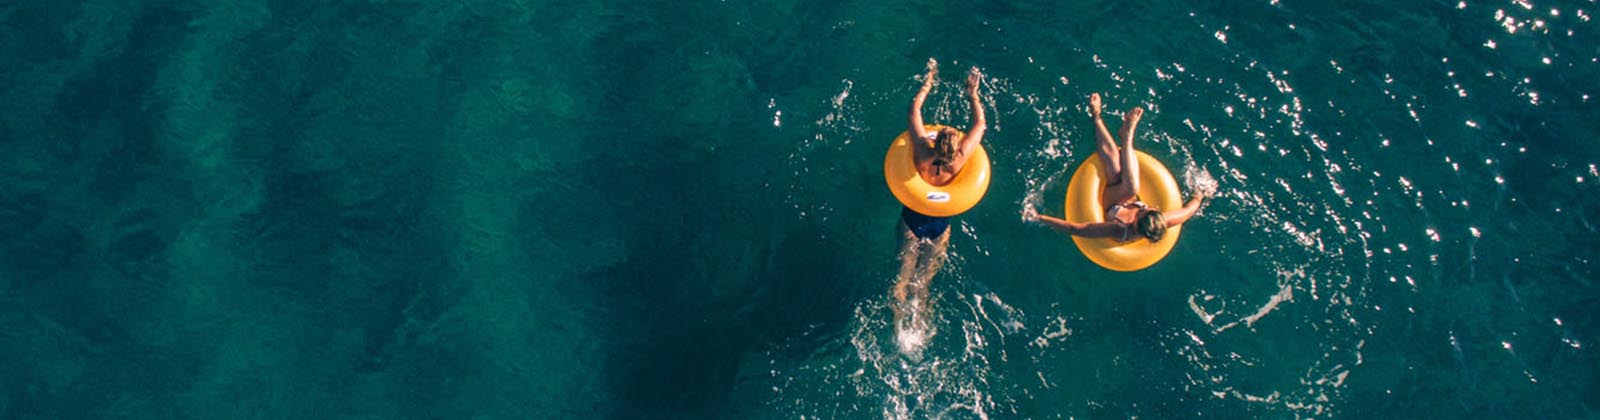 two people floating in inner tubes on the water